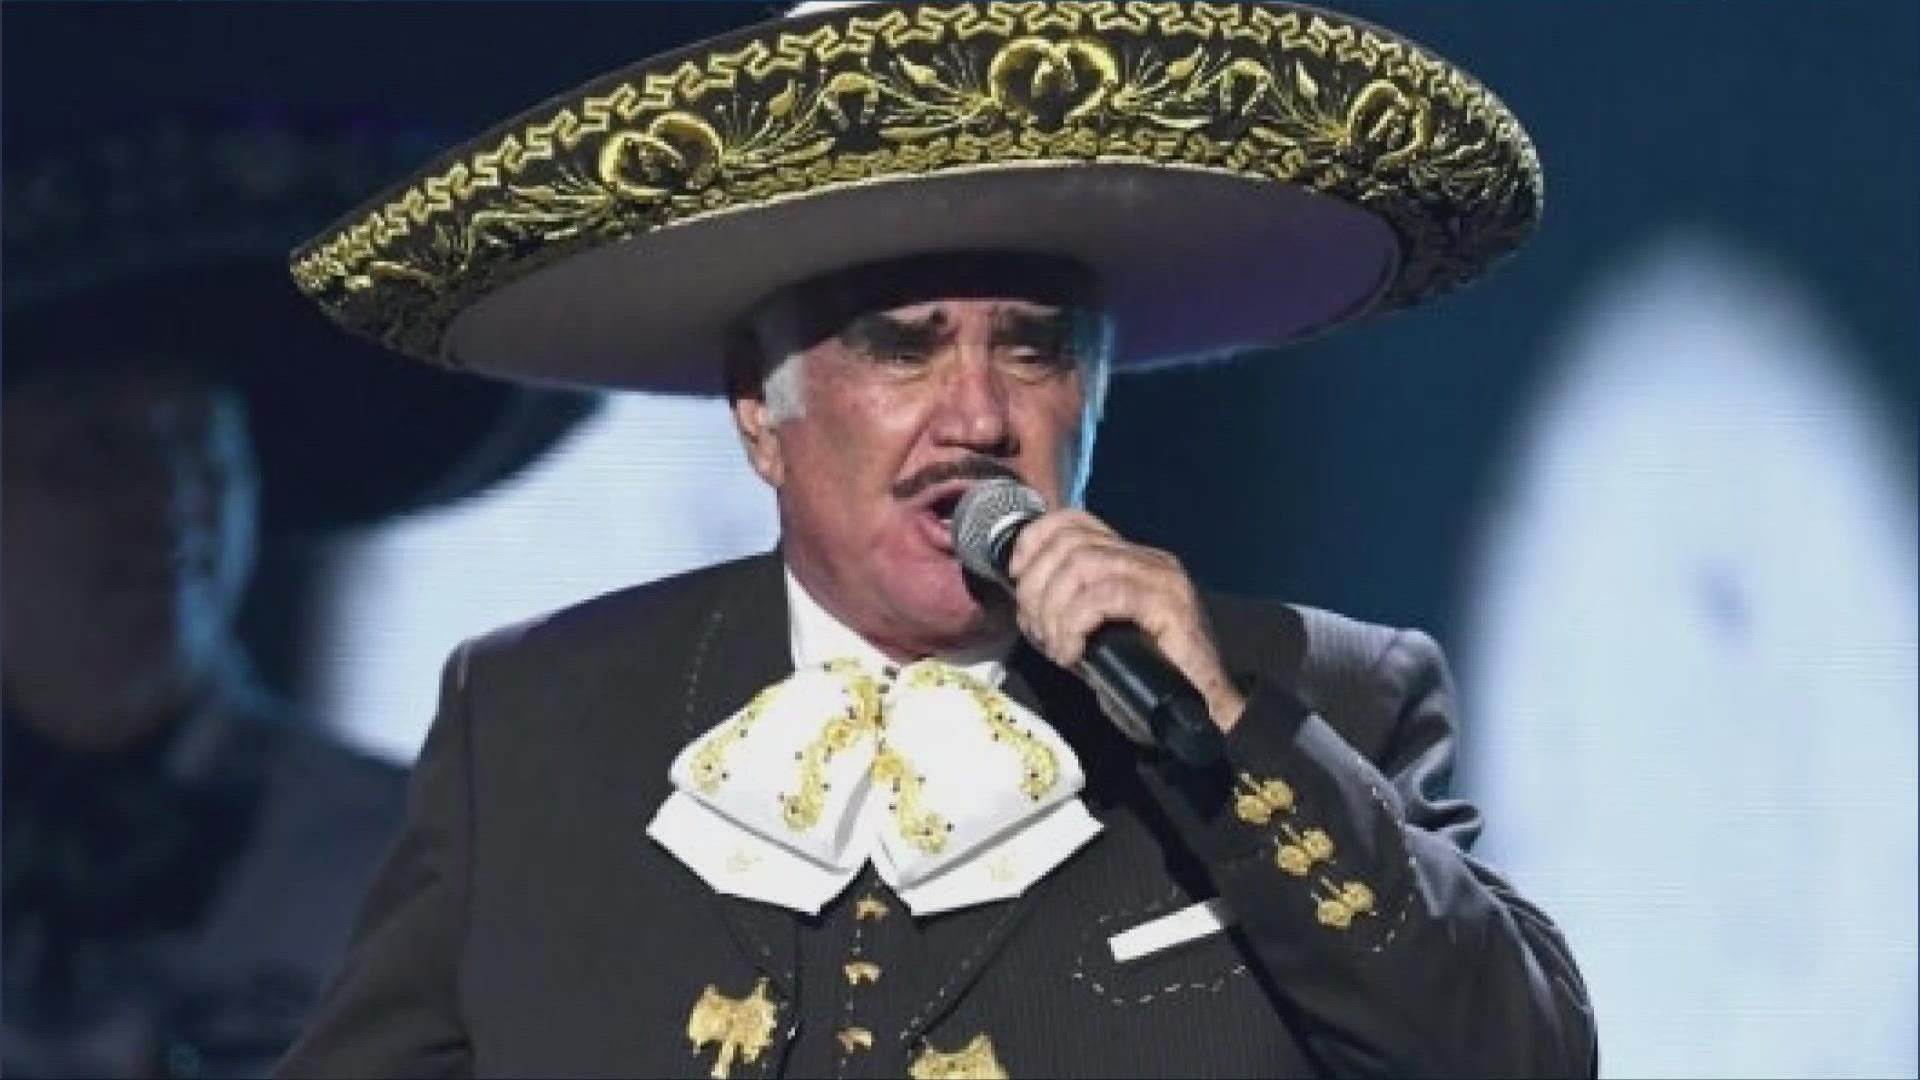 The legendary Mexican singer was mourned by many local leaders and fans in North Texas Sunday.